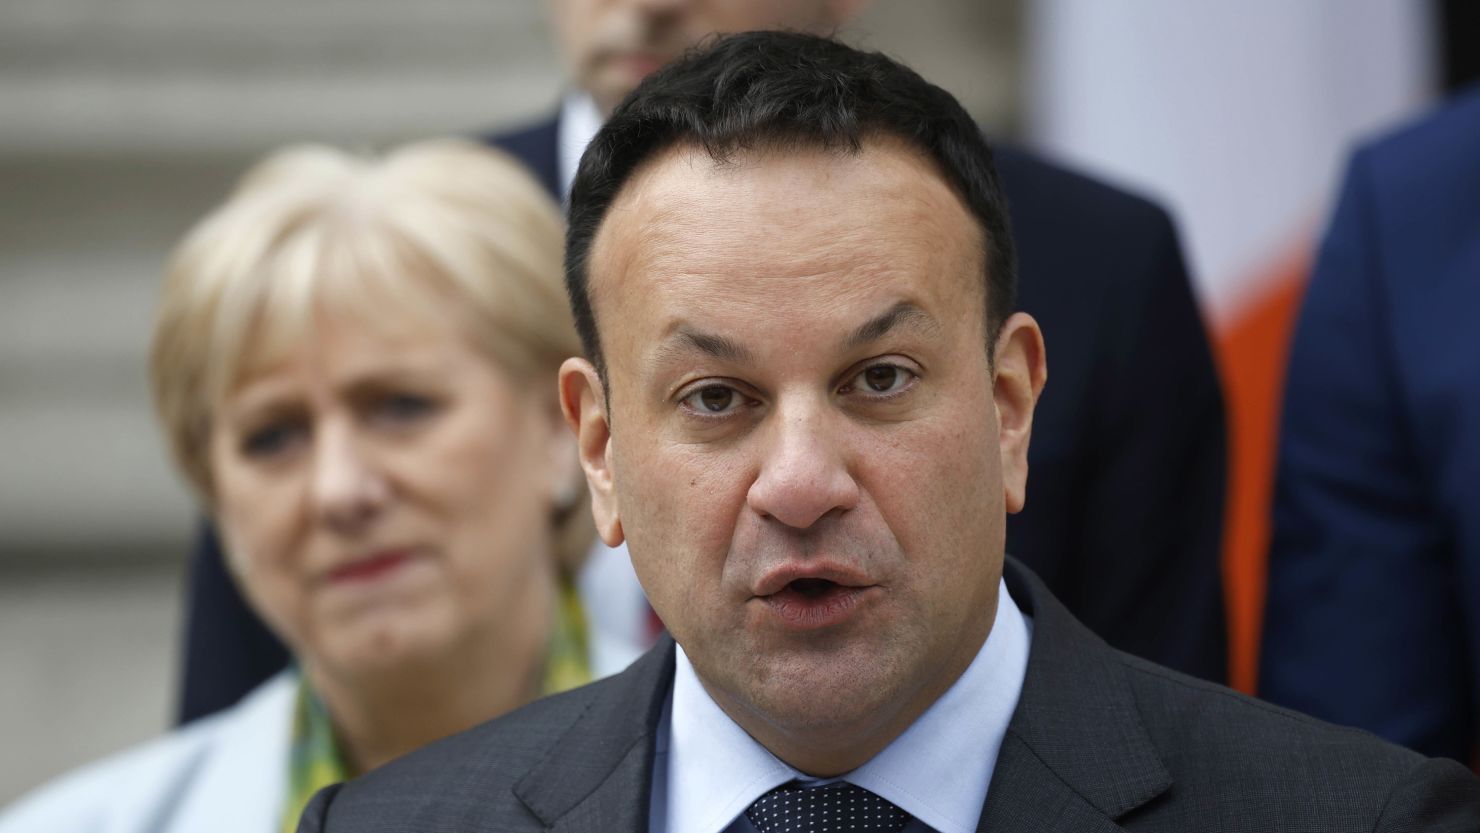 Irish Prime Minister Leo Varadkar made his announcement alongside party colleagues.